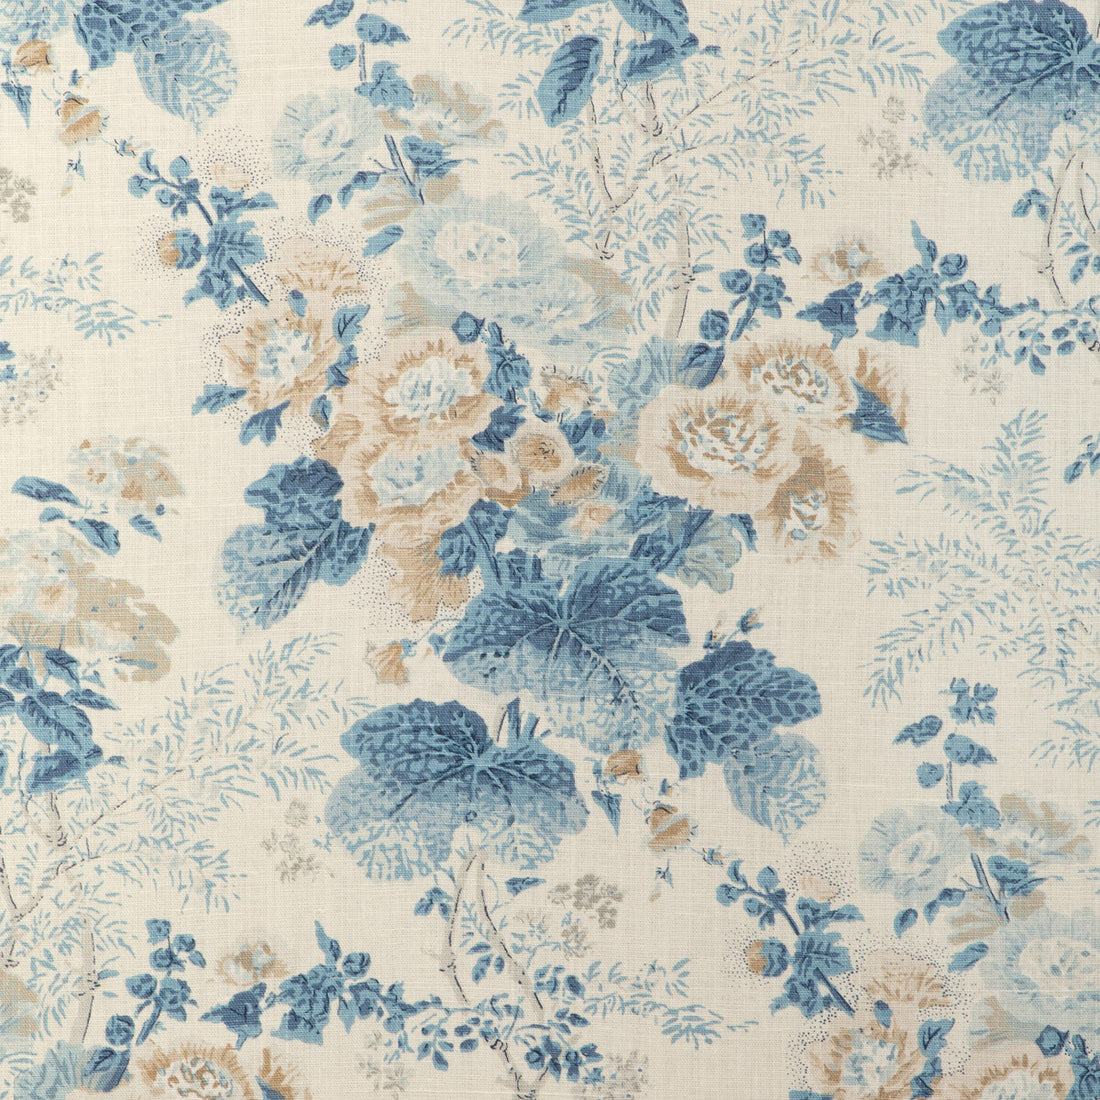 Althea Linen fabric in delft color - pattern 2023117.516.0 - by Lee Jofa in the Lee Jofa 200 collection